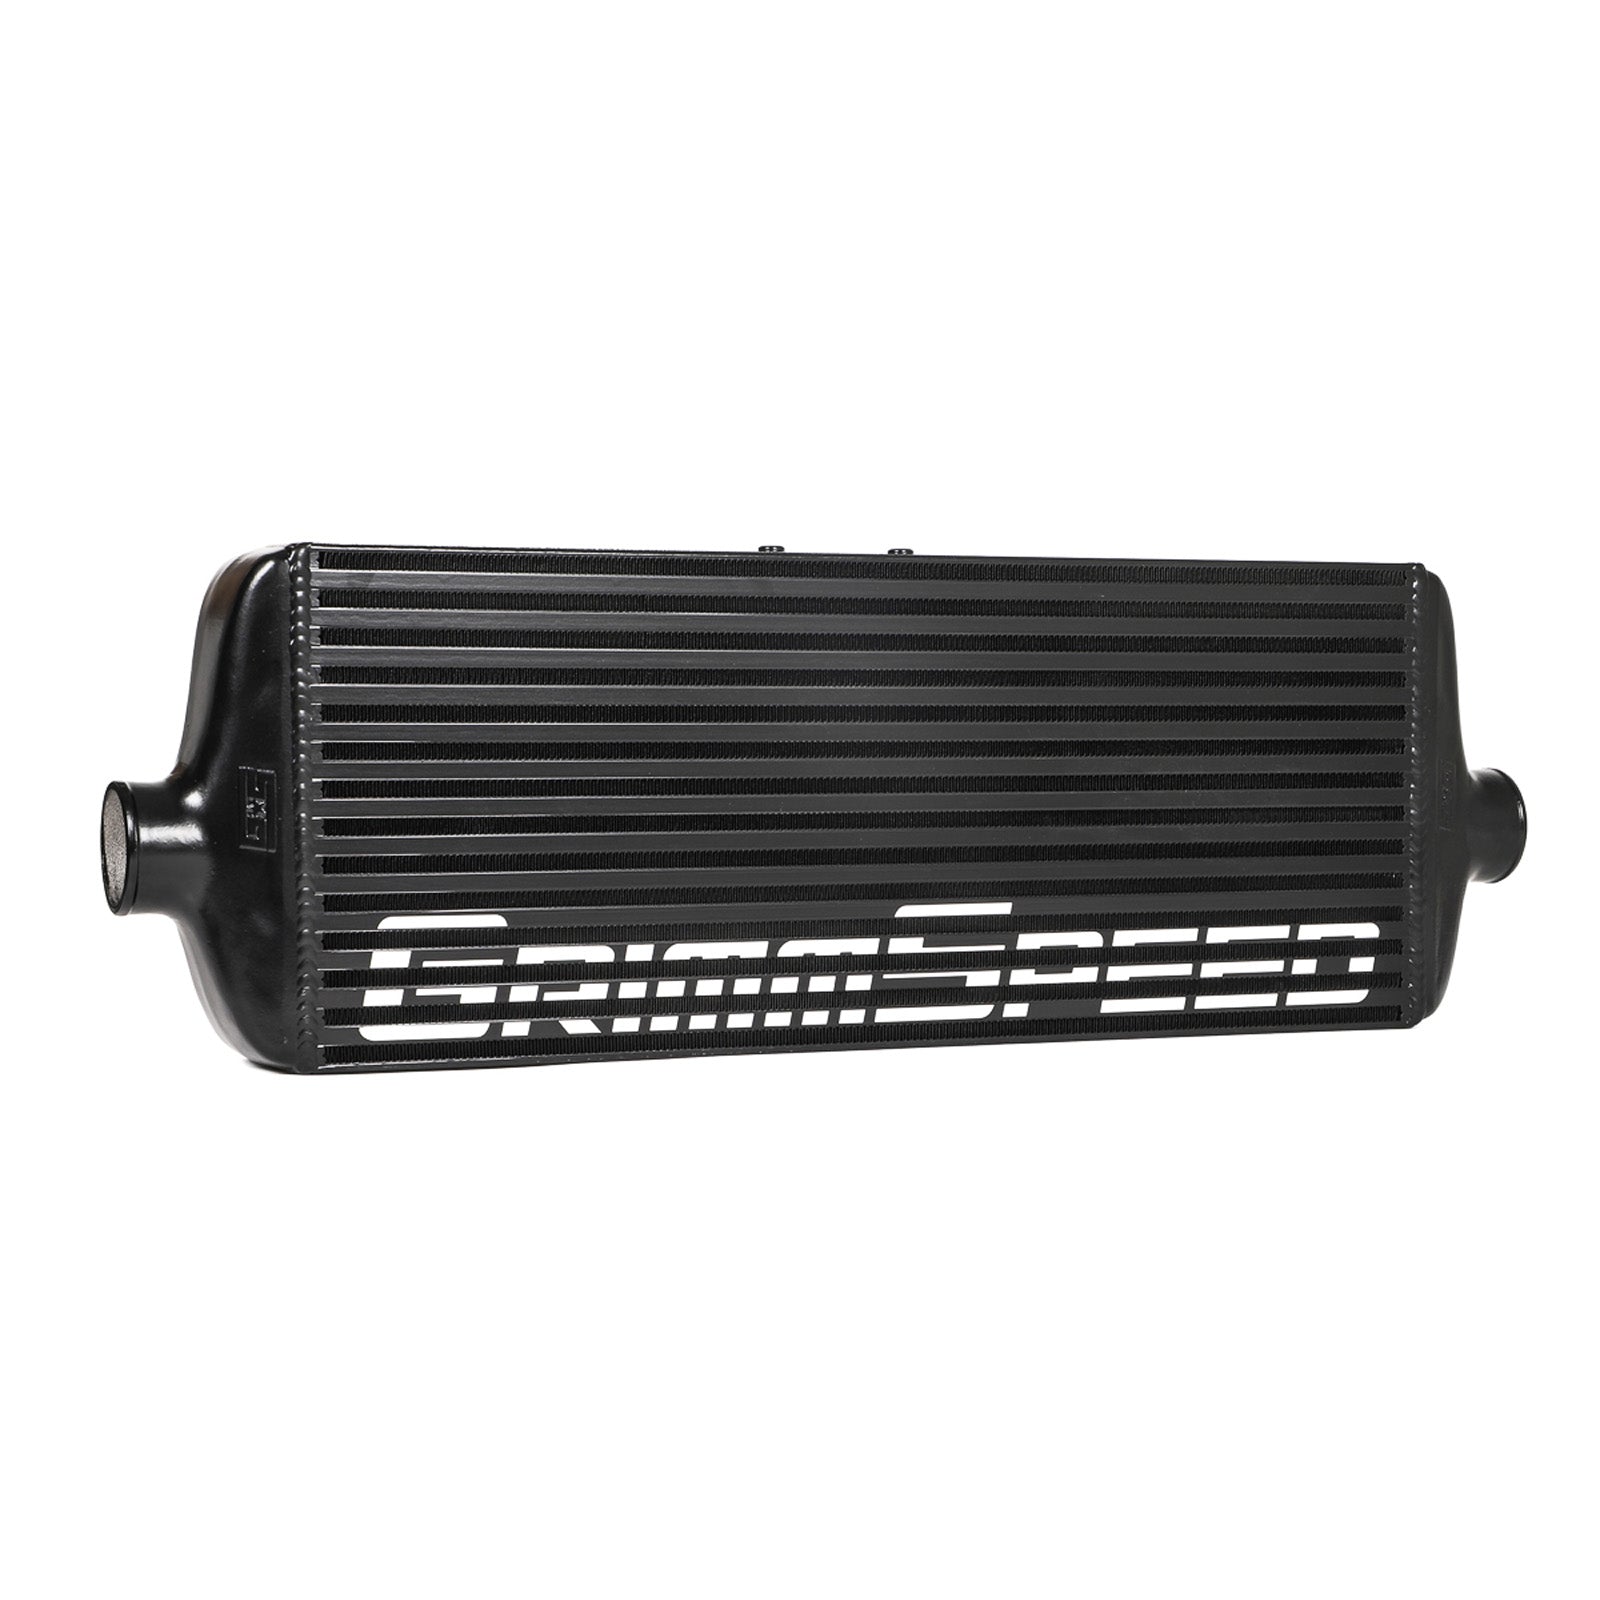 GrimmSpeed Front Mount Intercooler Kit - Black Core with Red Piping - 2015-21 Subaru WRX